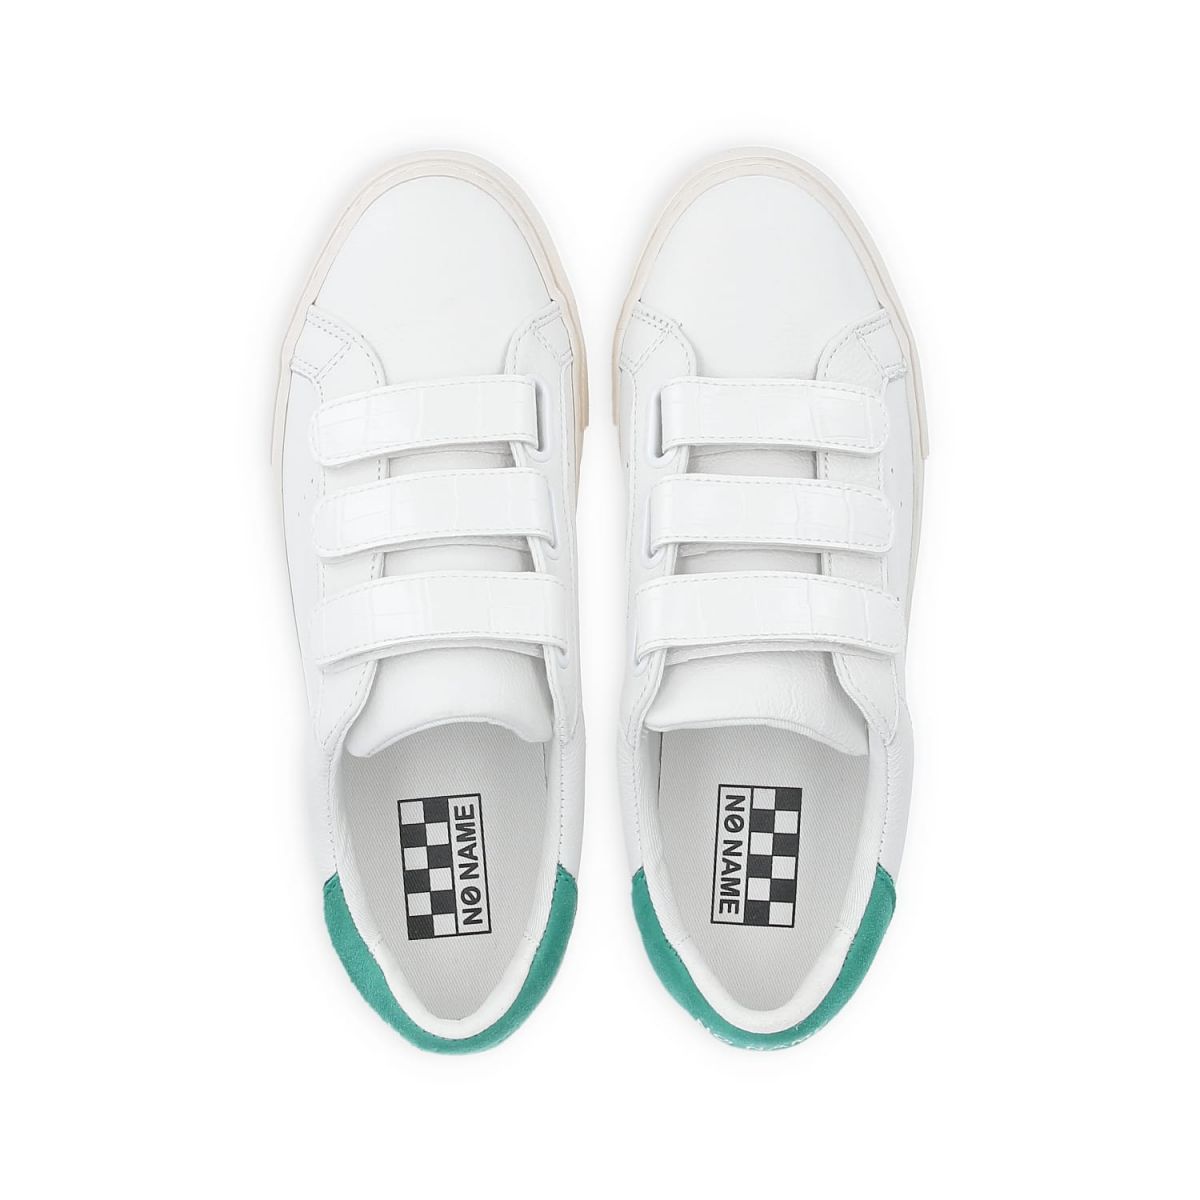 Arcade Straps White Menthe Sneakers KNGDRG042U - 5